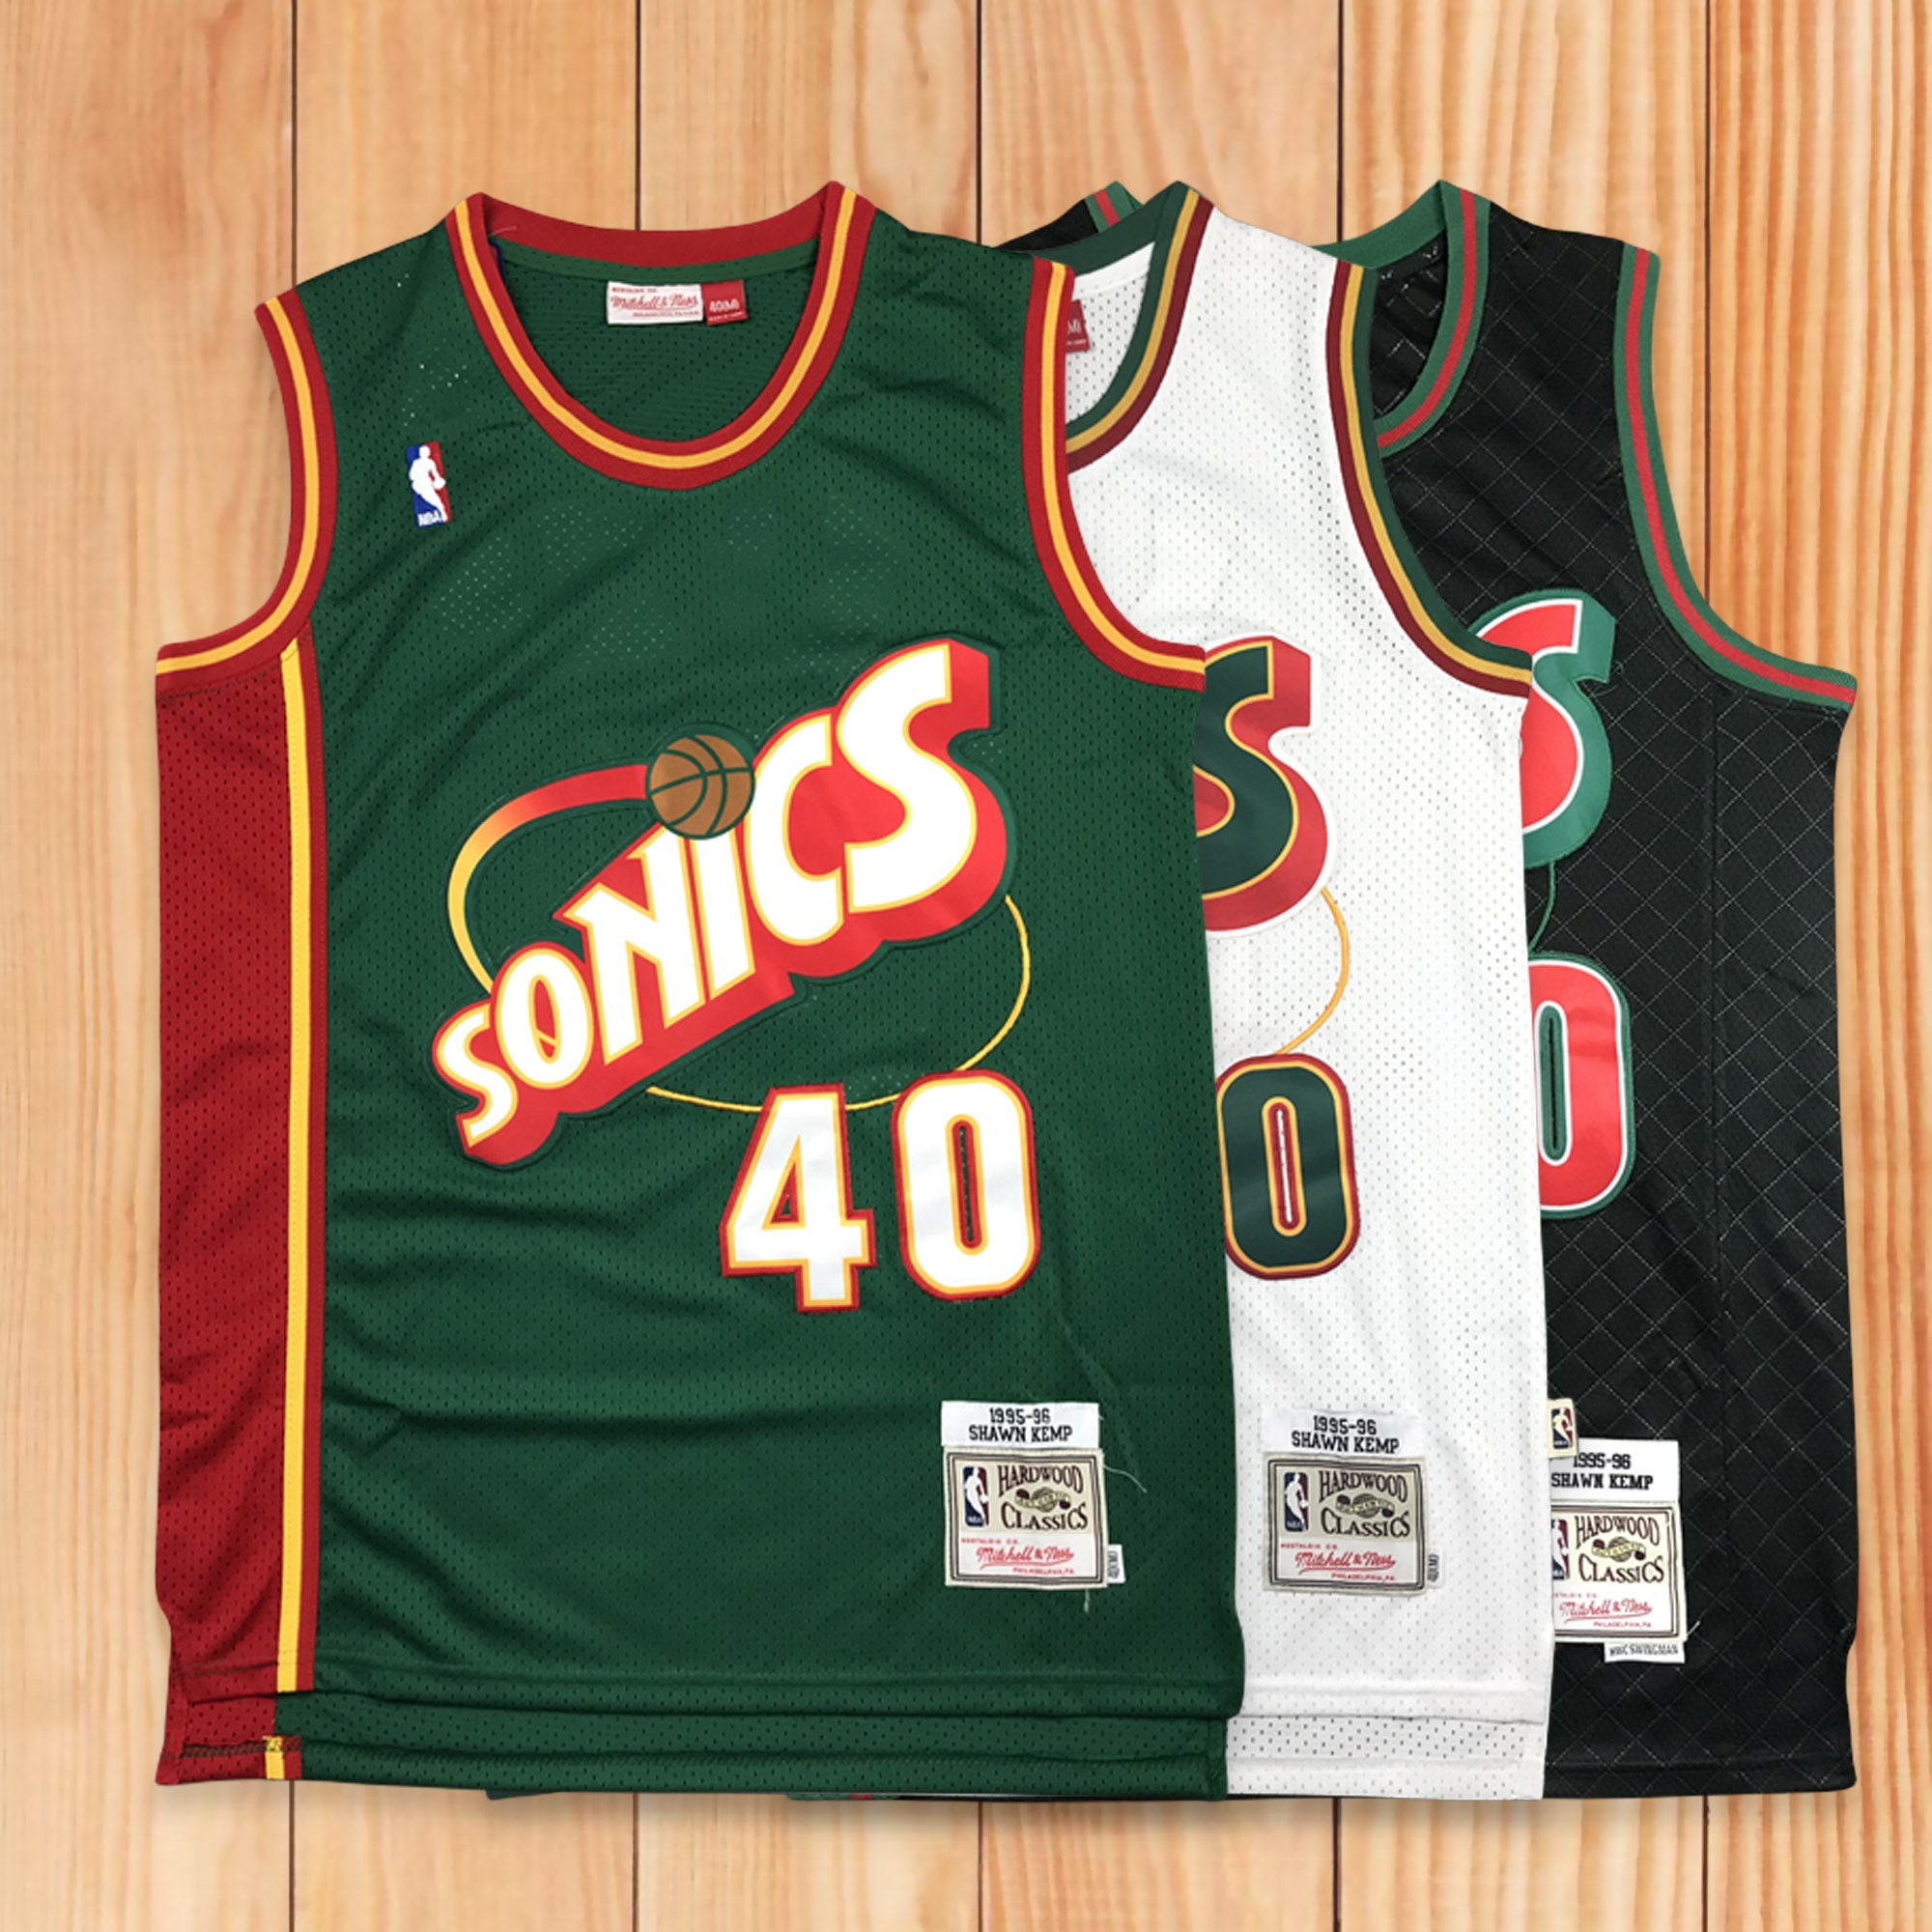 NEW XL Mitchell & Ness Authentic 90s Cleveland Cavaliers Shawn Kemp NBA  Jersey